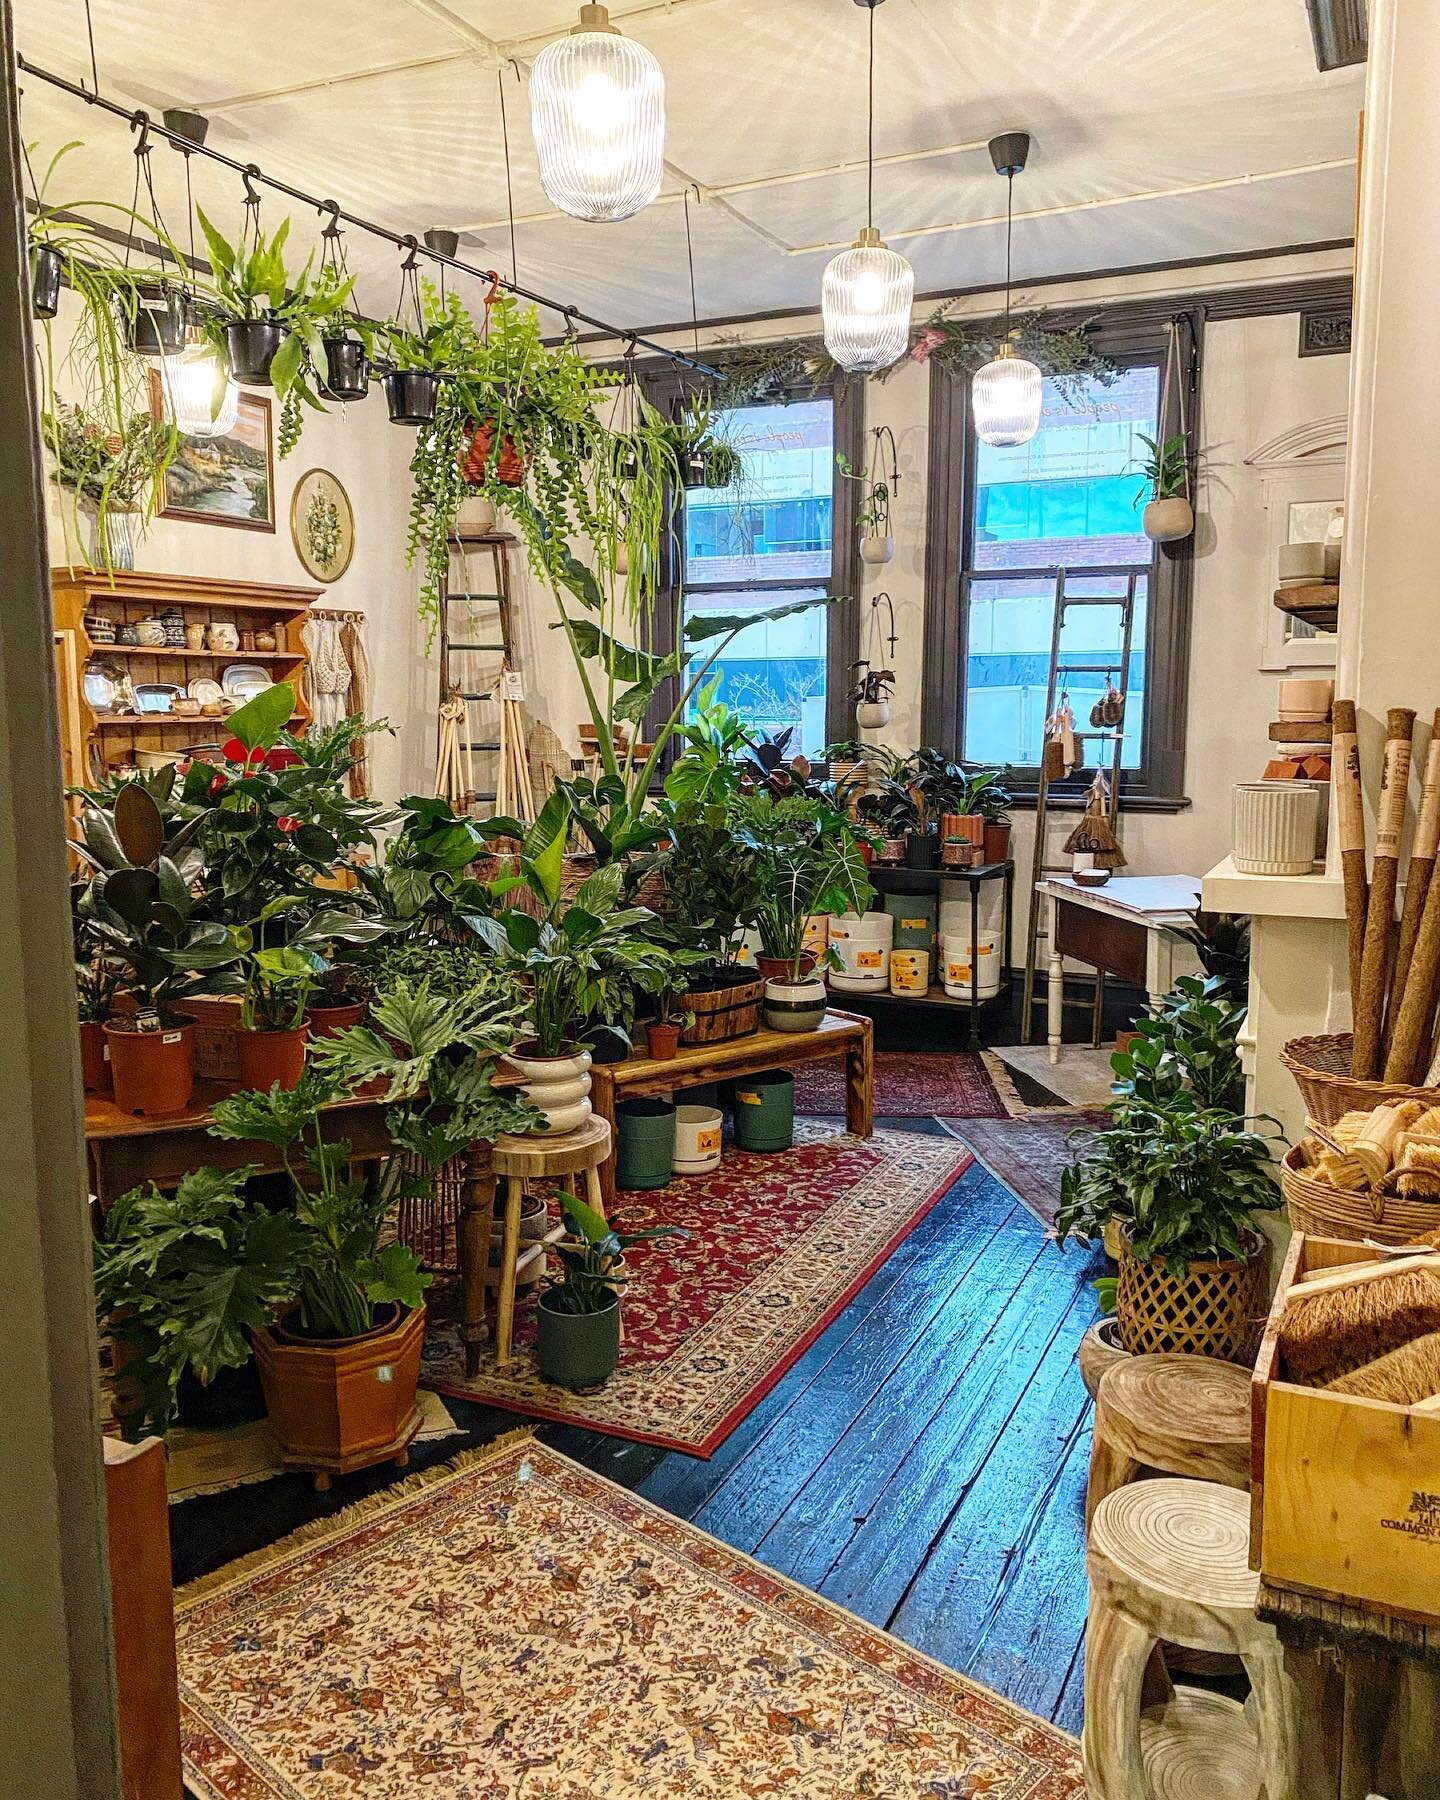 Our sister business @peoplevsempire opens today! Located upstairs in our grocery store it&rsquo;s an indoor botanical haven of beautiful plants and all things associated. 

Open thurs to sat 10-4 for now, with extended days soon. 

#familybusiness #b